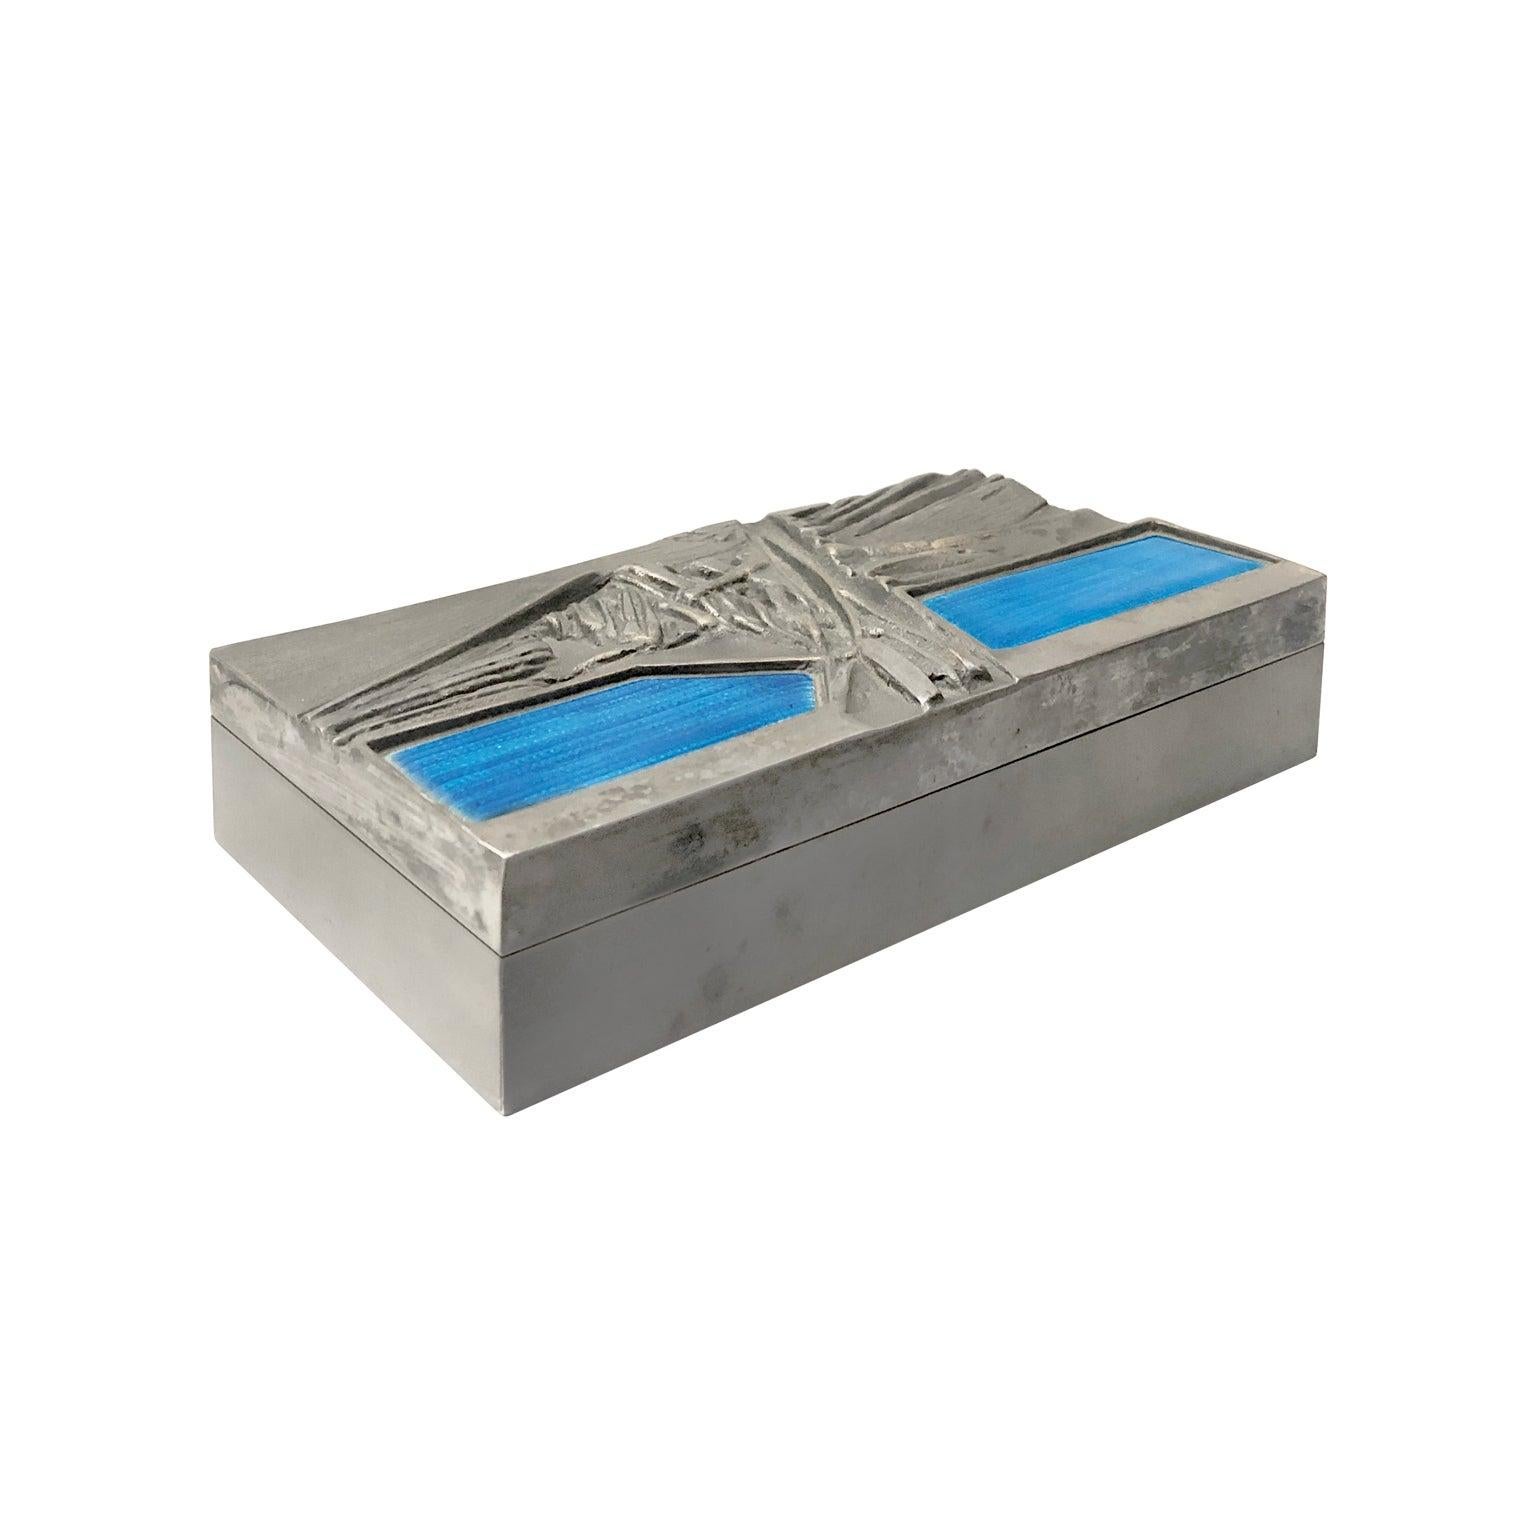 Del Campo engraved steel box with blue enamel lid detail, Italy, 1950s.
 